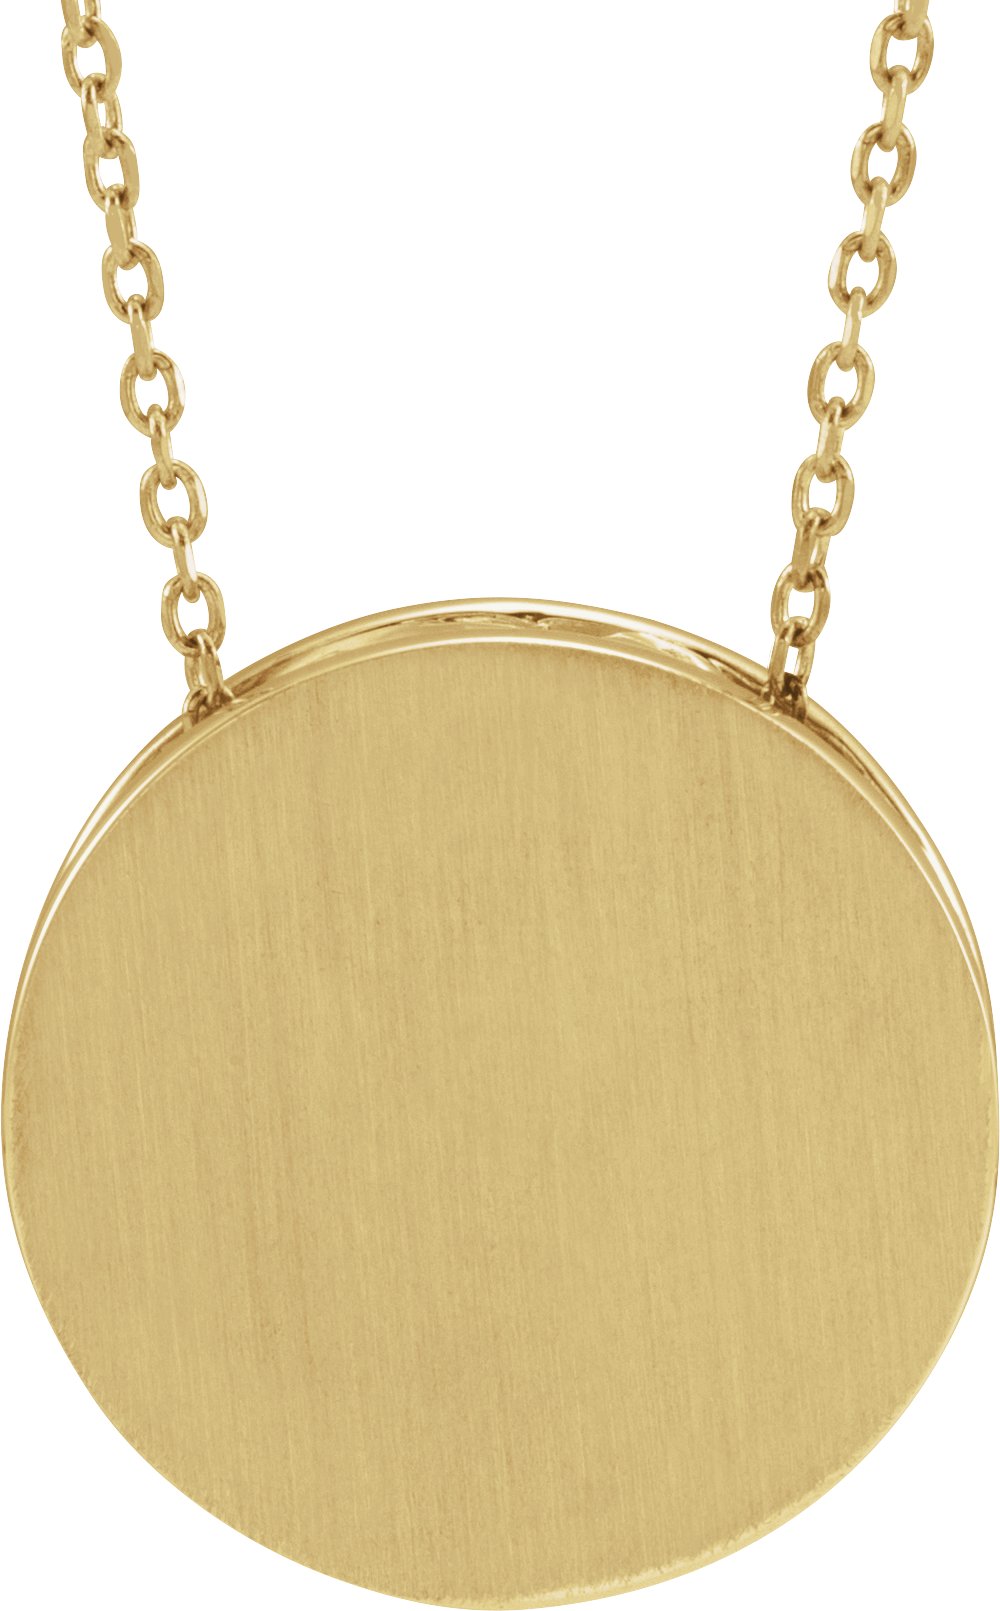 14K Yellow 17 mm Scroll Disc 16-18" Necklace